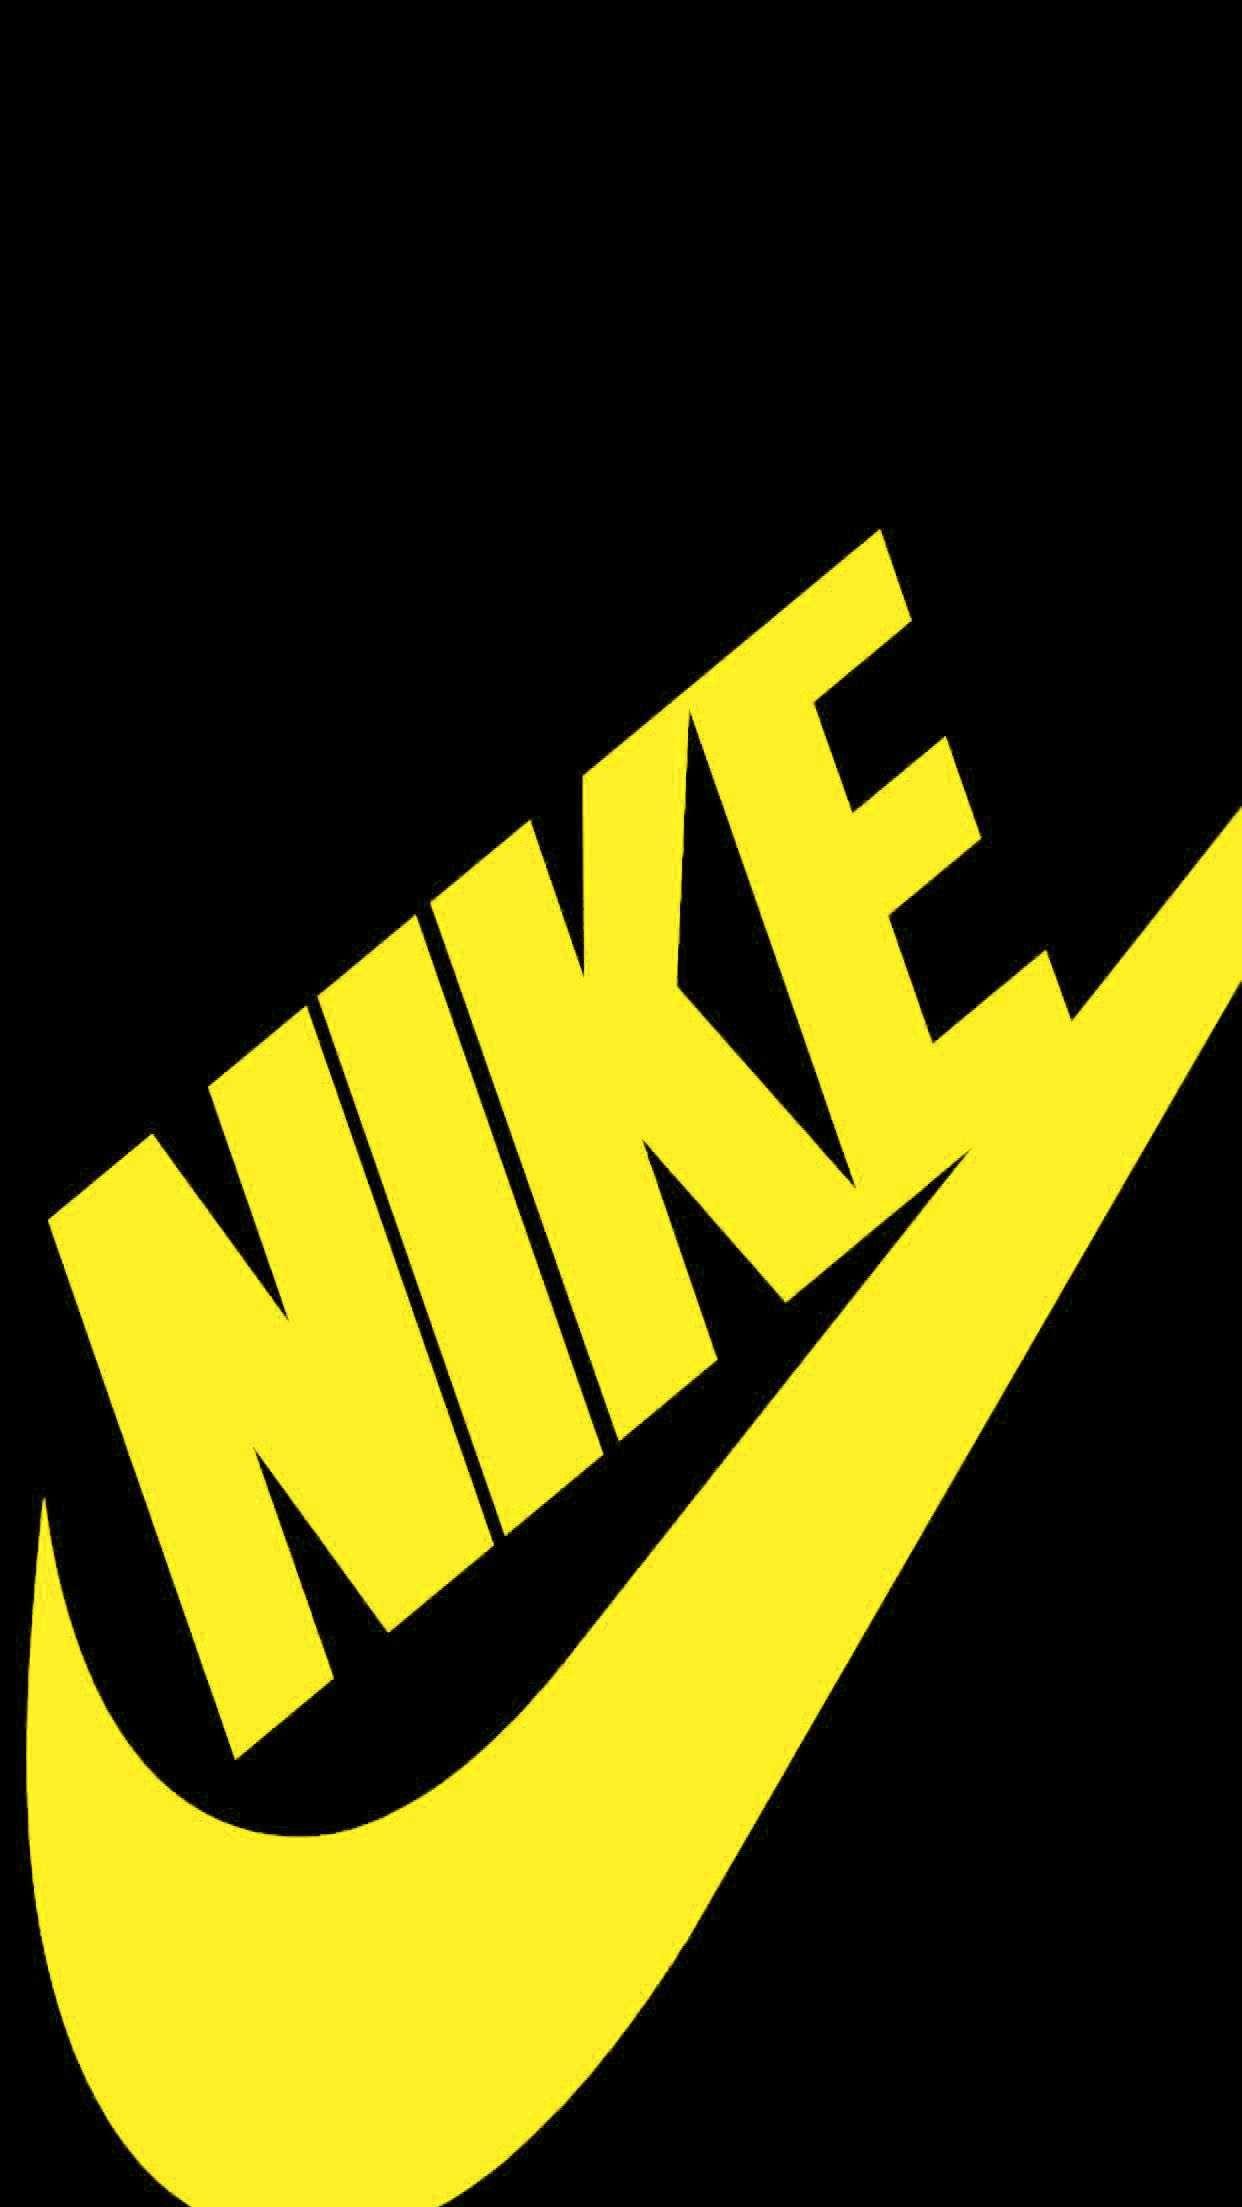 Nike Wallpaper Browse Nike Wallpaper with collections of Adidas